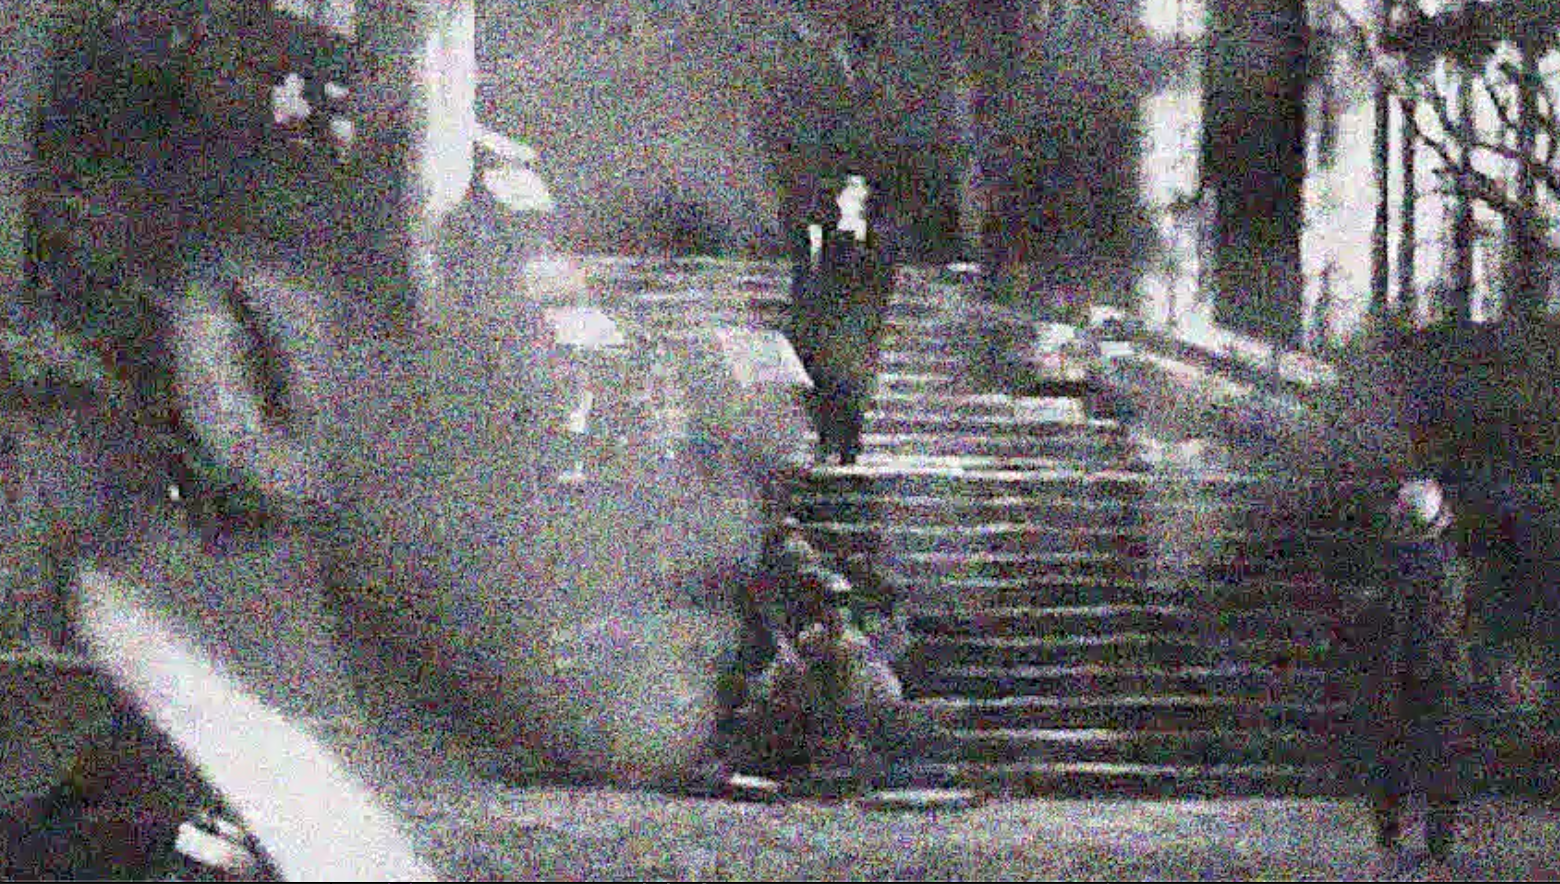 Still from “Dude Descending a Staircase” courtesy of Rahhe Alexander.